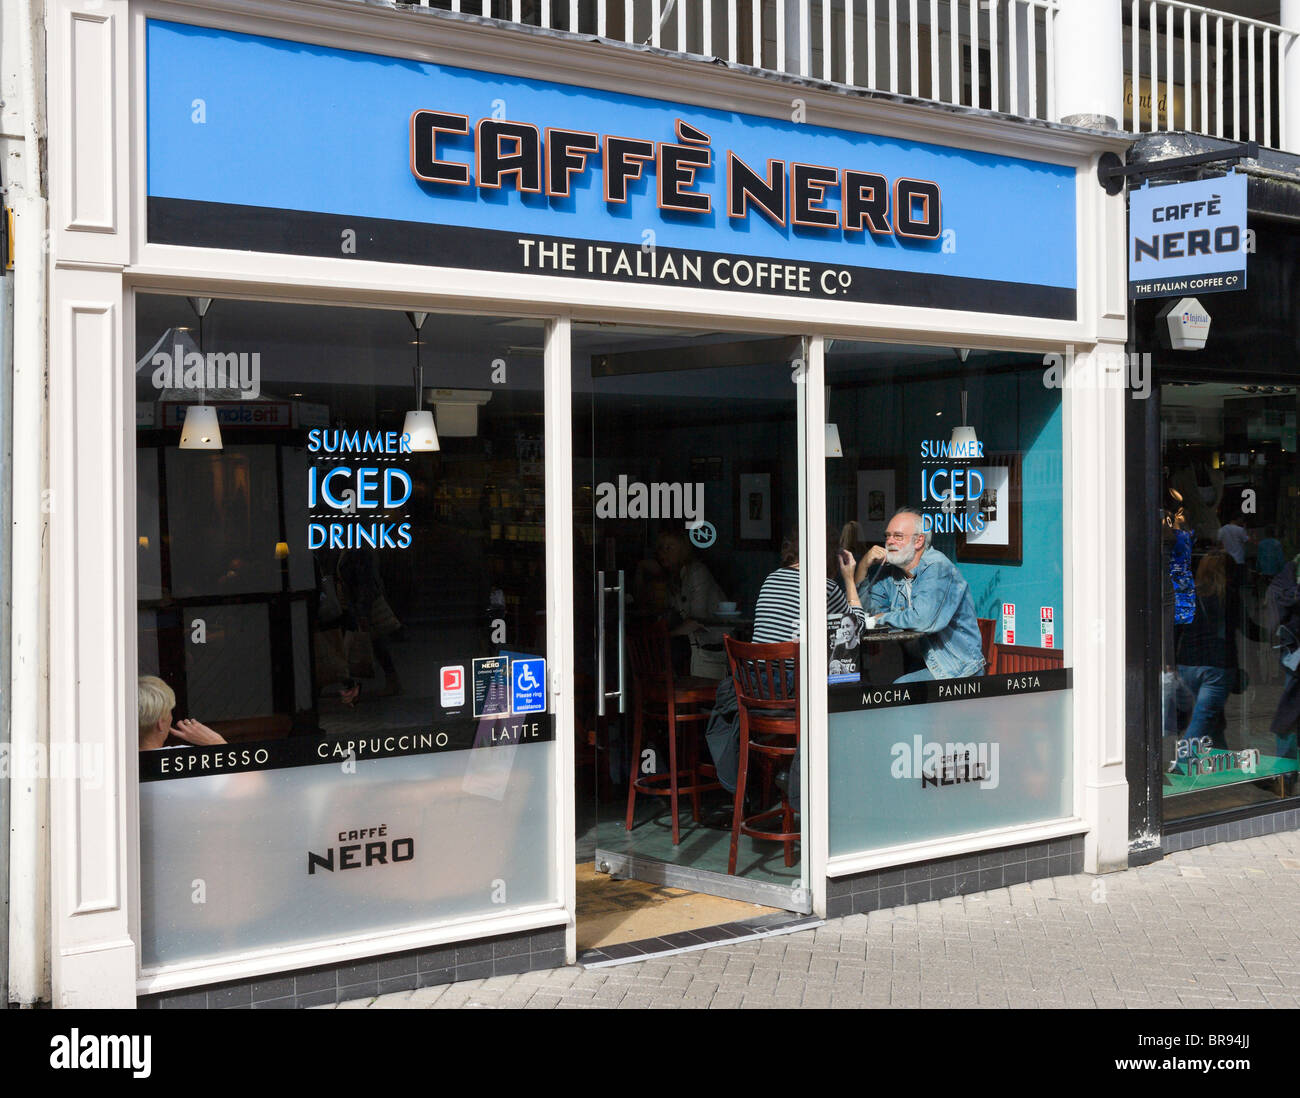 https://c8.alamy.com/comp/BR94JJ/caffe-nero-coffee-shop-in-chester-town-centre-cheshire-england-uk-BR94JJ.jpg